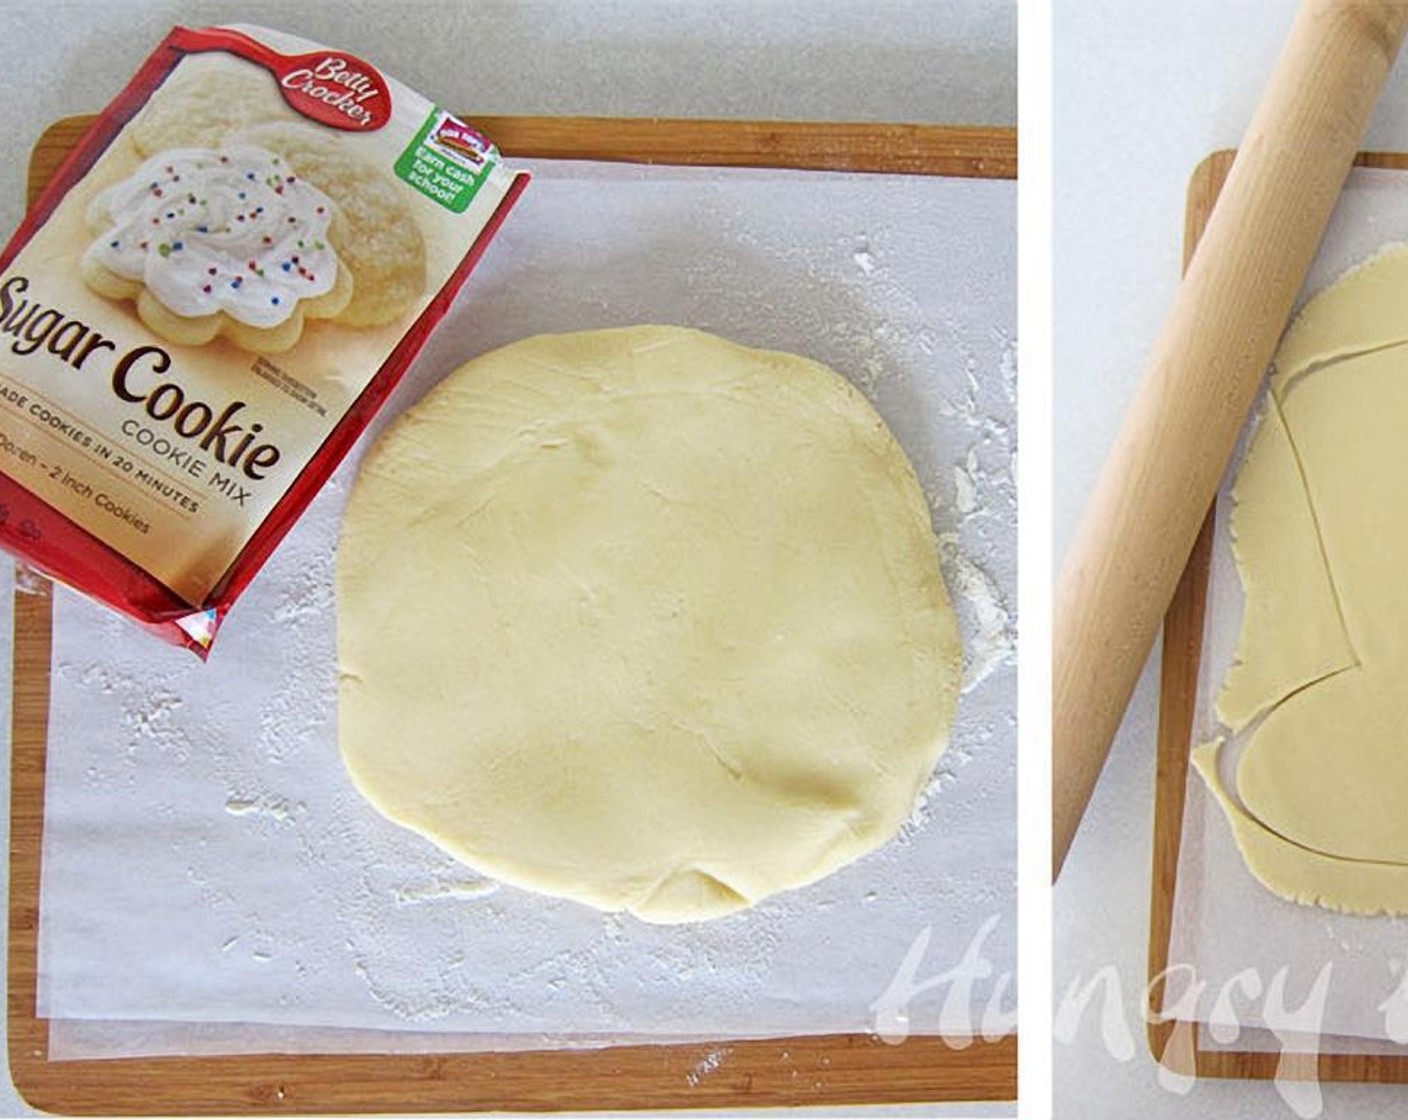 step 1 MIx Sugar Cookie Mix (1 pckg), All-Purpose Flour (2 Tbsp), Butter (1/2 cup) and Egg (1) until well combined. Scoop dough out of bowl, shaped into a round disc, then wrap in plastic wrap and refrigerate for 30 minutes.